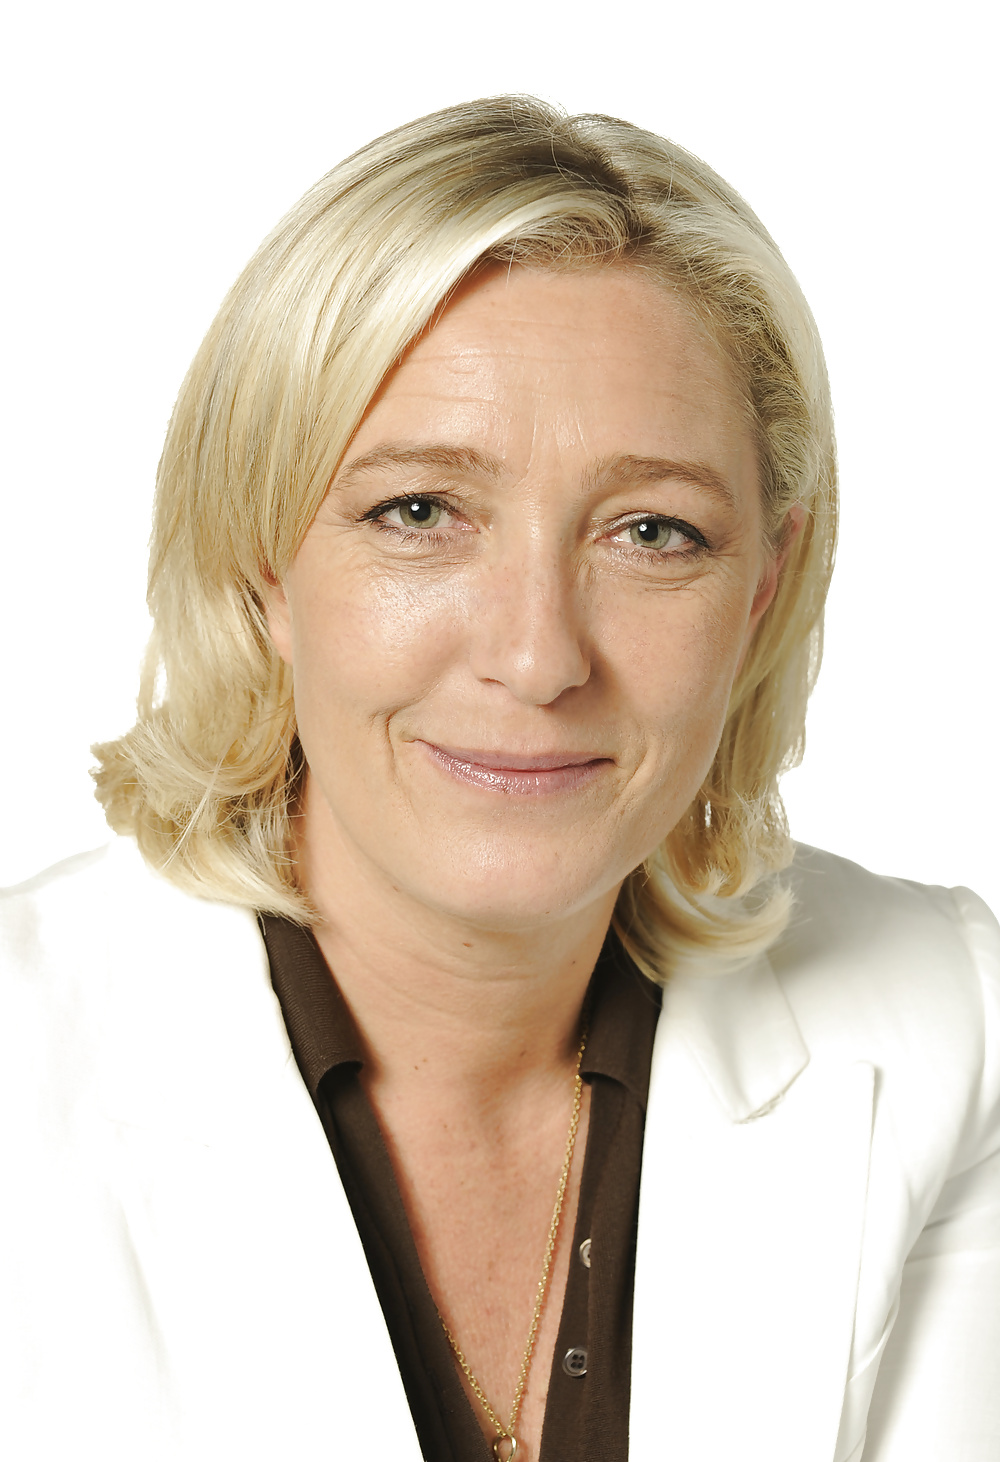 I adore jerking to sexy Marine Le Pen #35343905